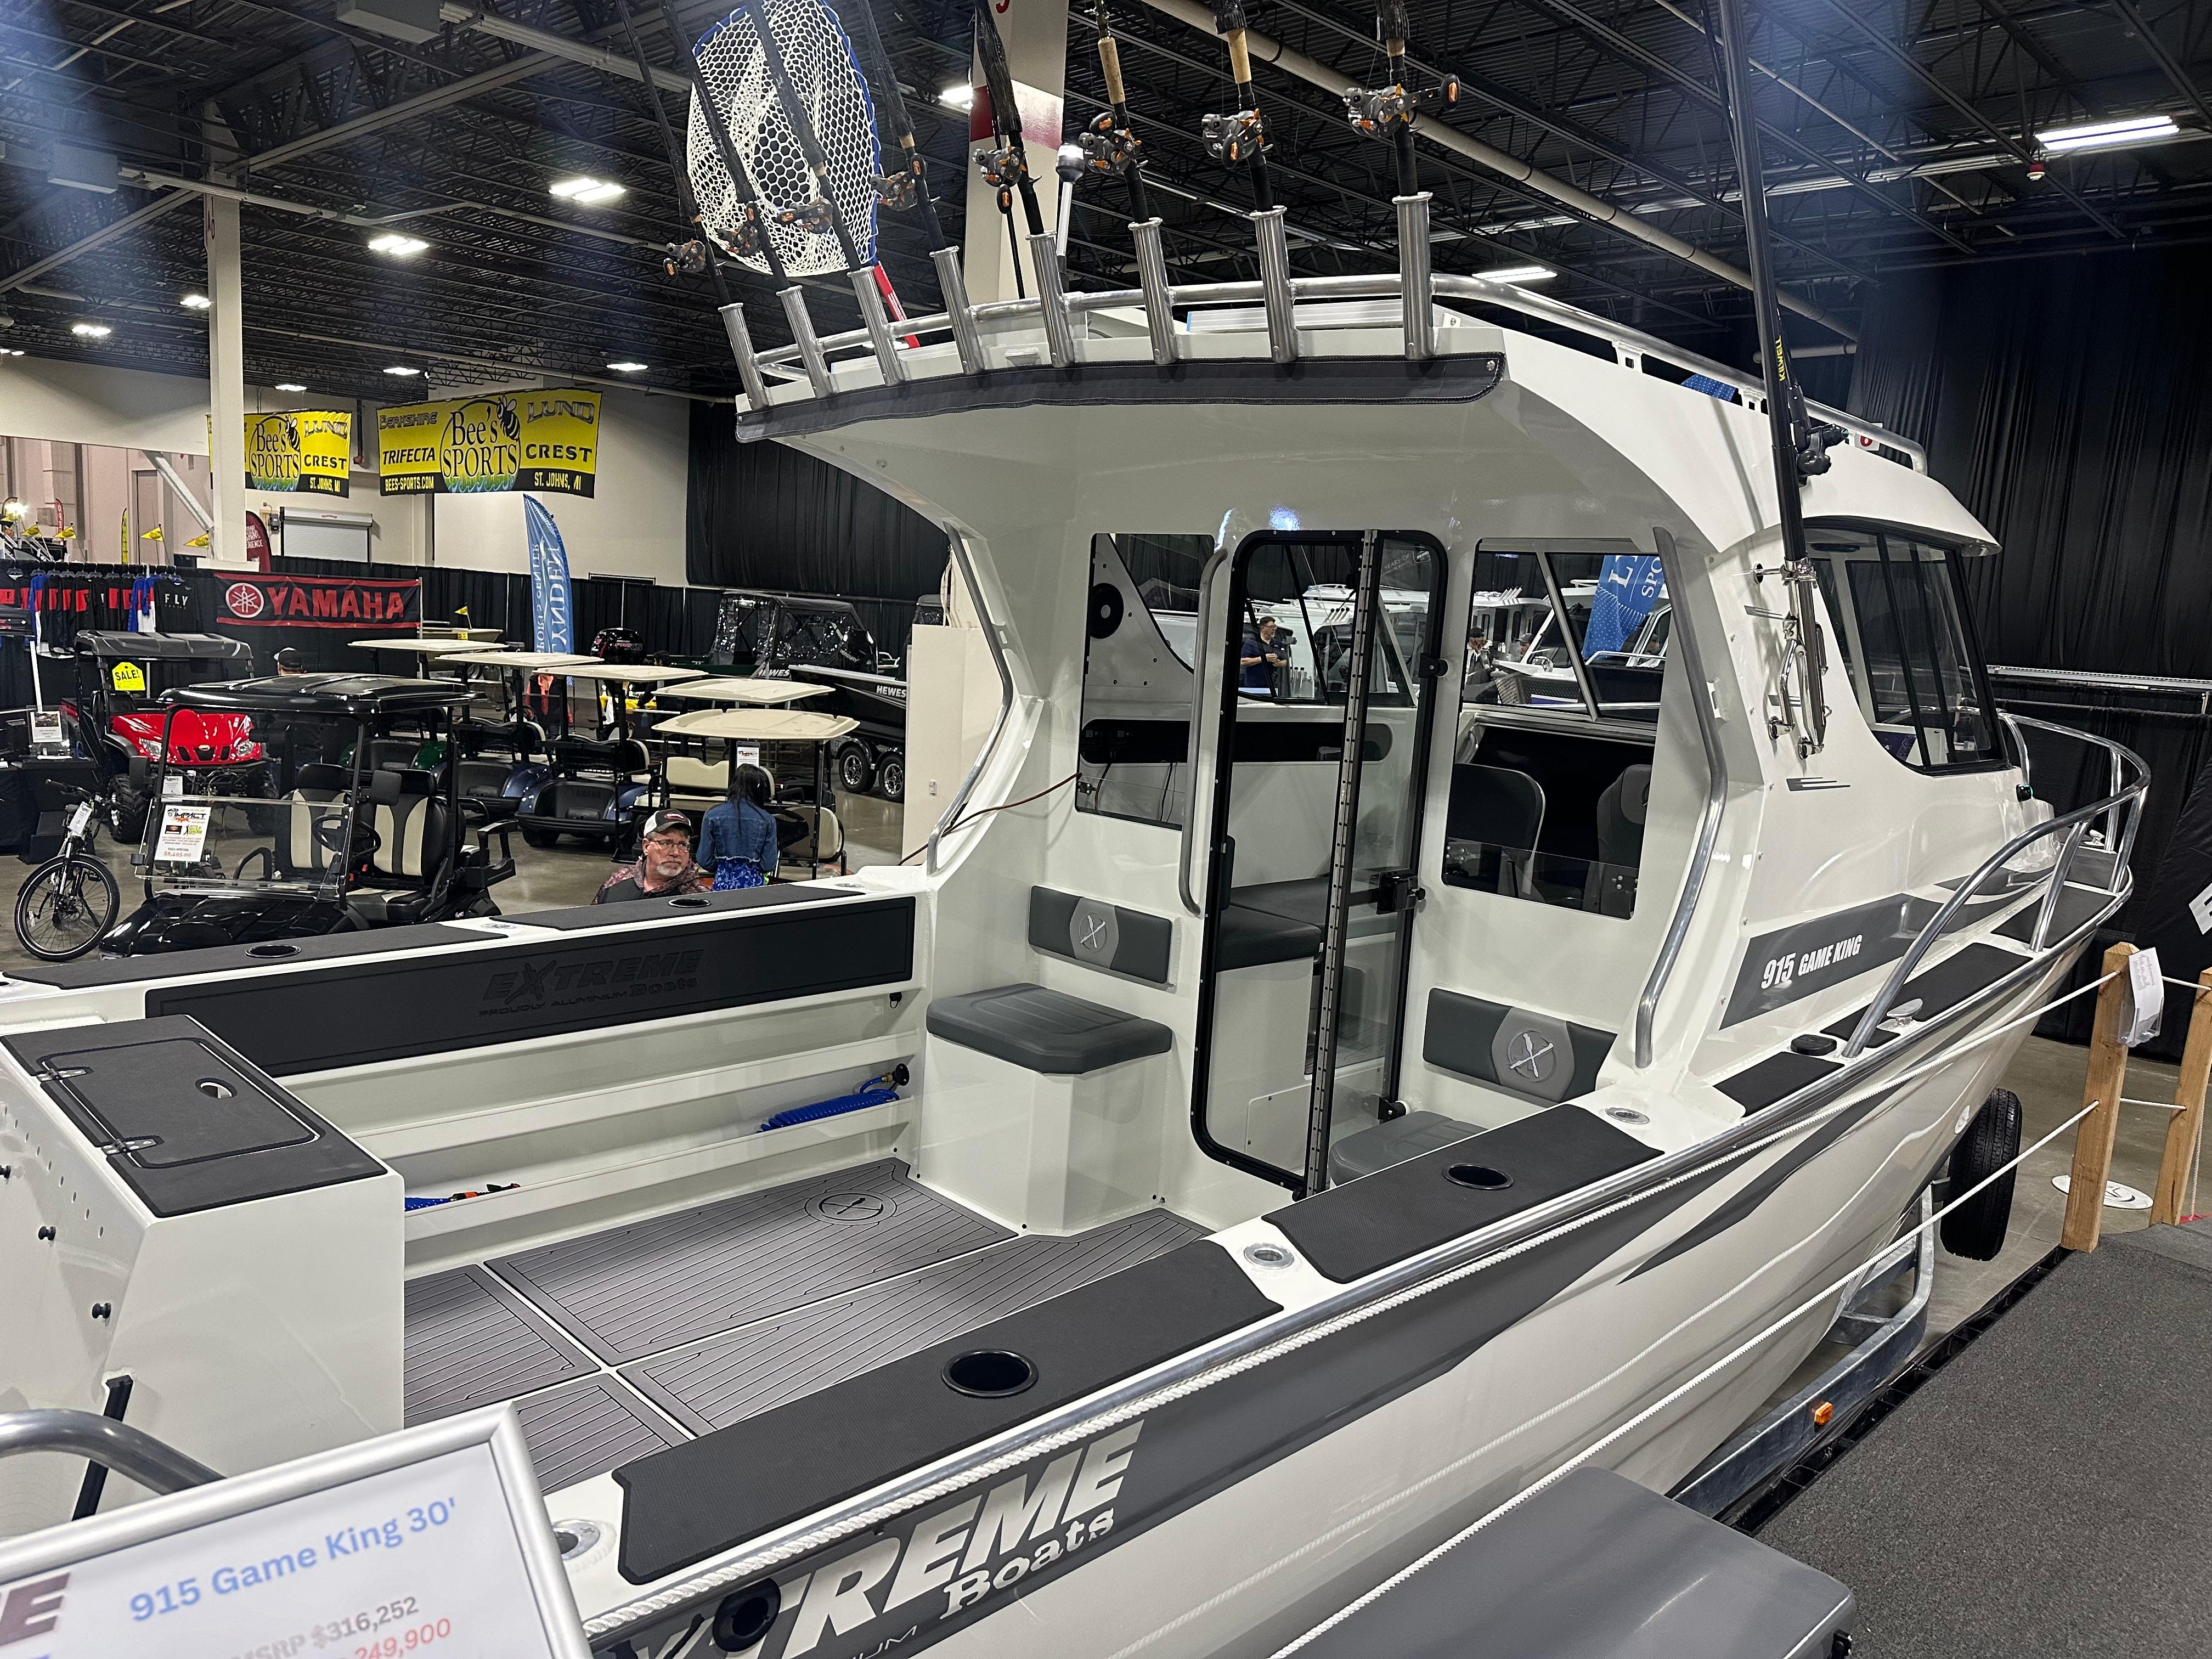 New 2024 Extreme Boats 915 Game King 30' for Sale by Parma Marine (440) 221-9001